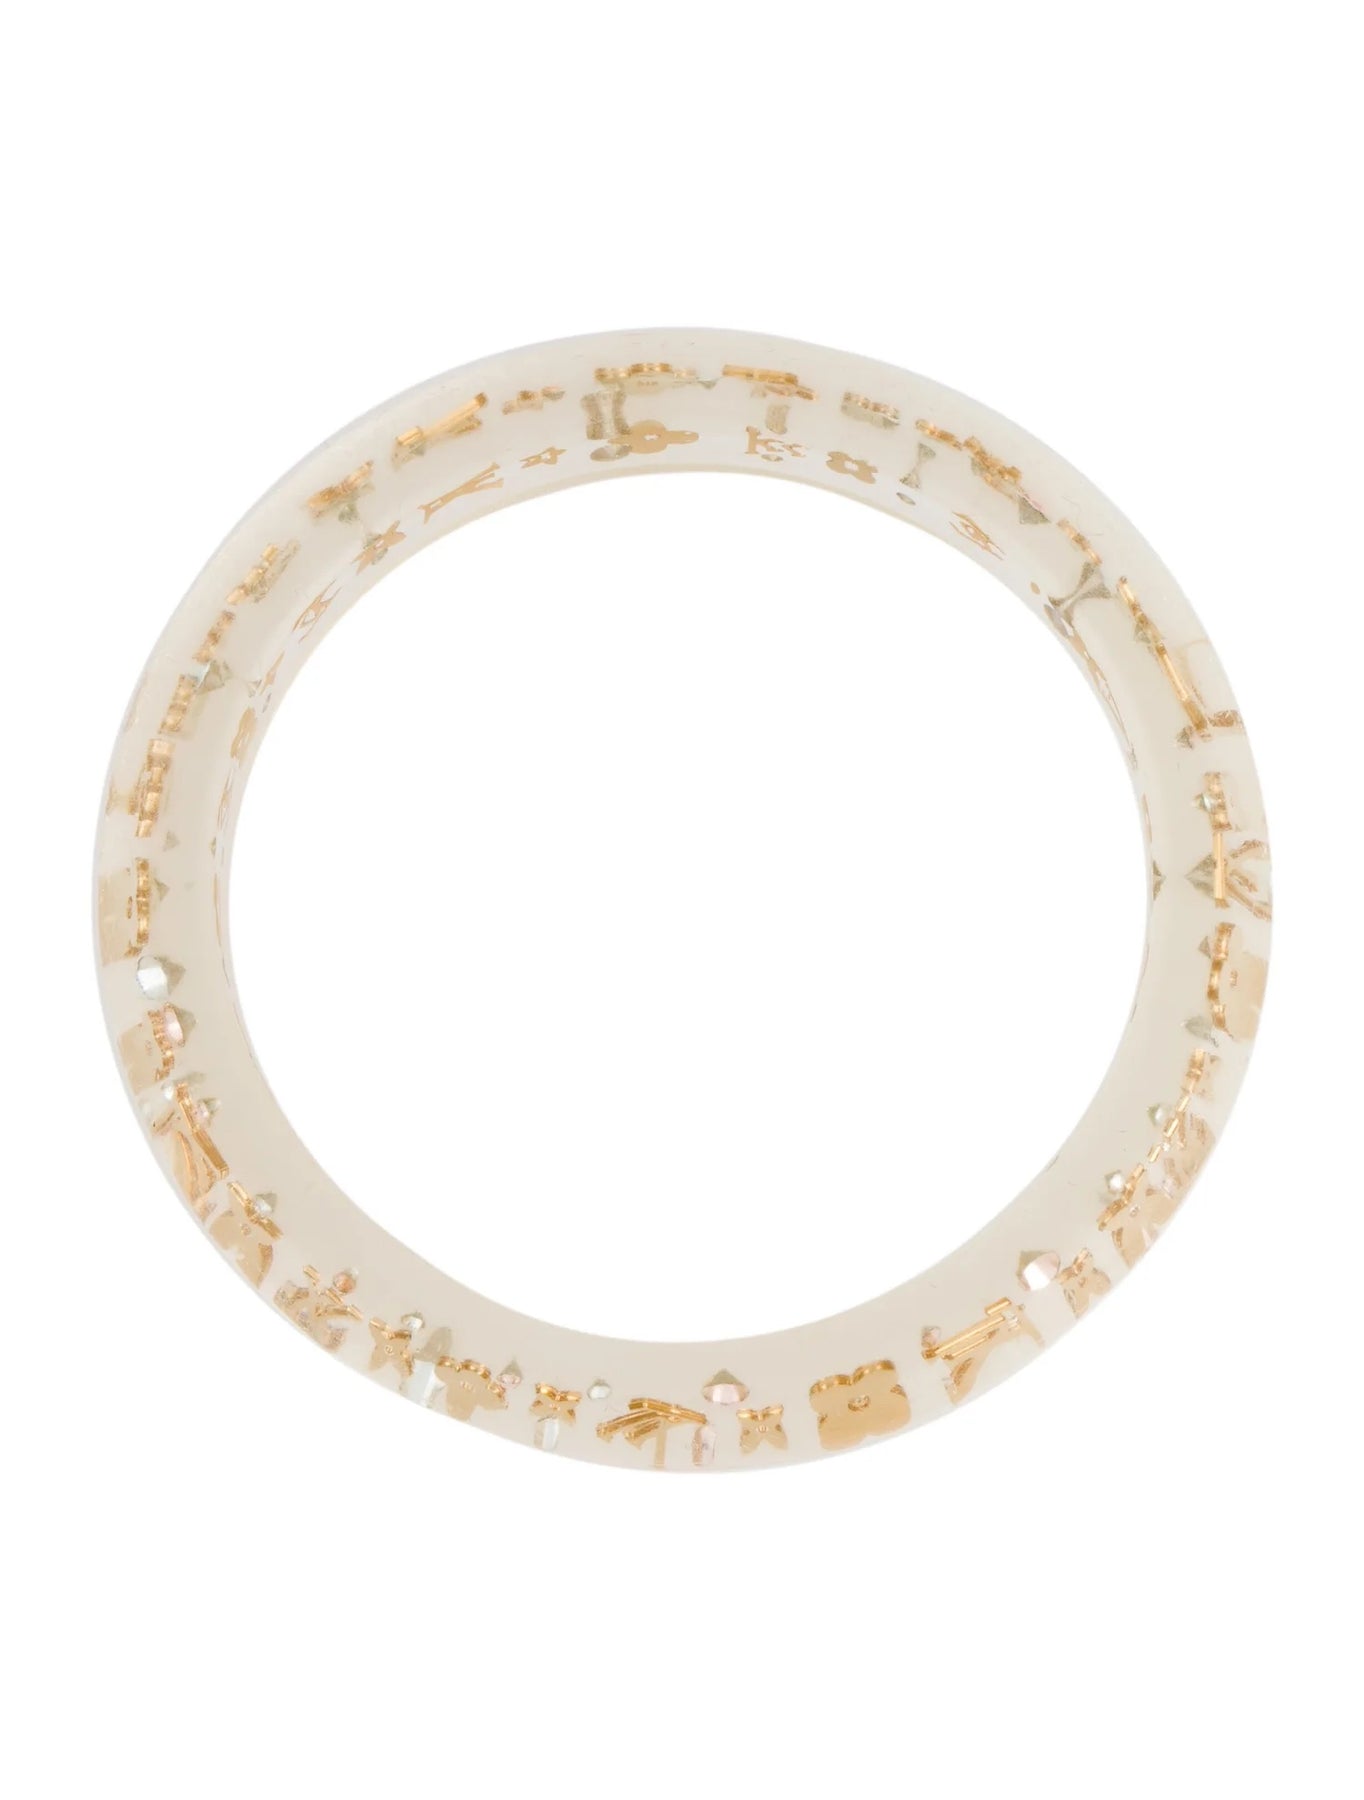 Louis Vuitton Clear and Gold Inclusion Thin Resin Bangle Bracelet